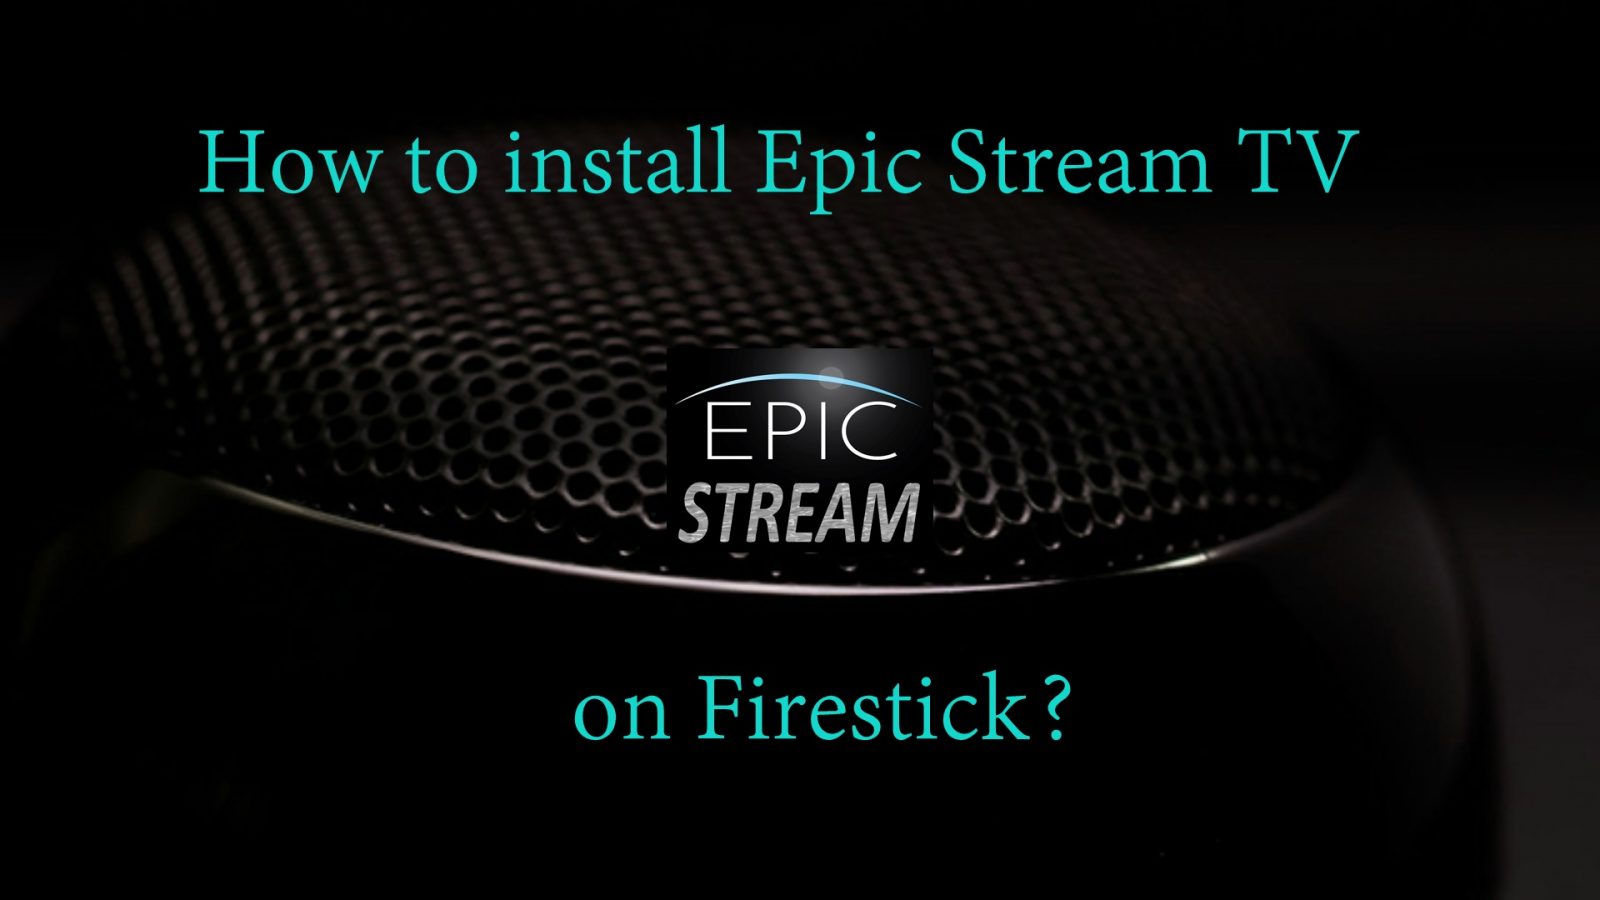 How to install Epic Stream TV on Firestick